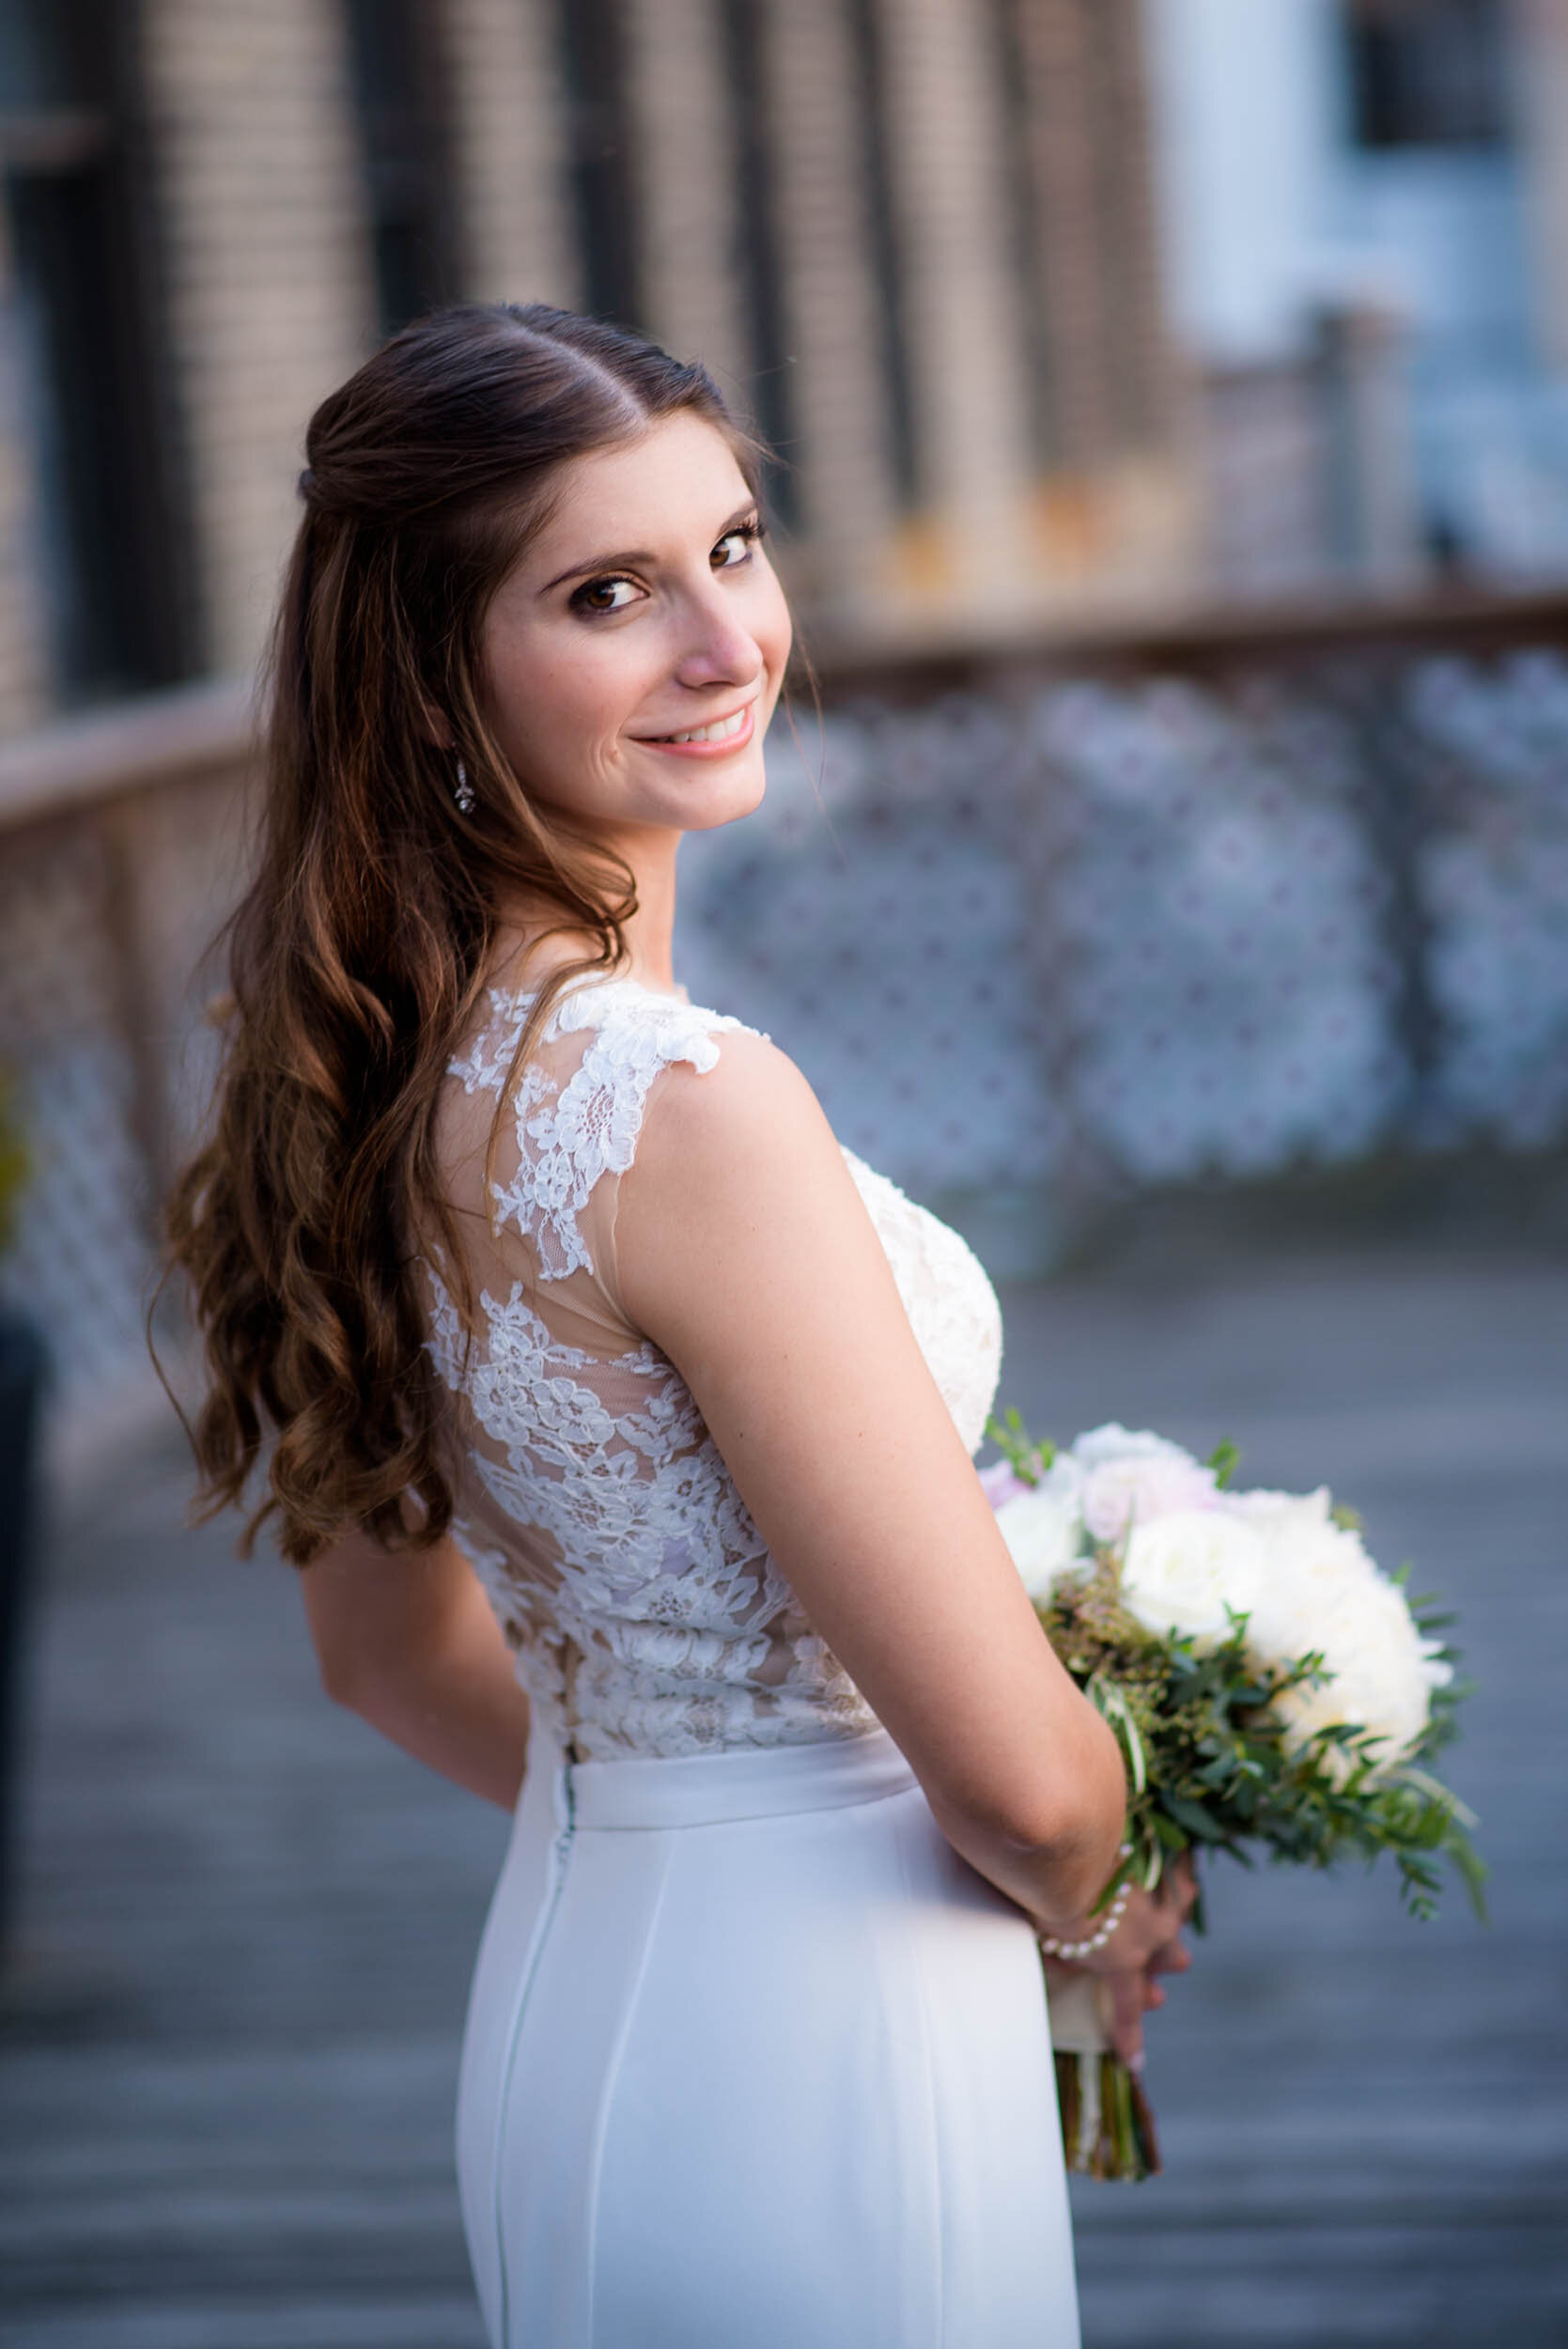 Classic portrait of the bride: Ravenswood Event Center Chicago wedding captured by J. Brown Photography.  